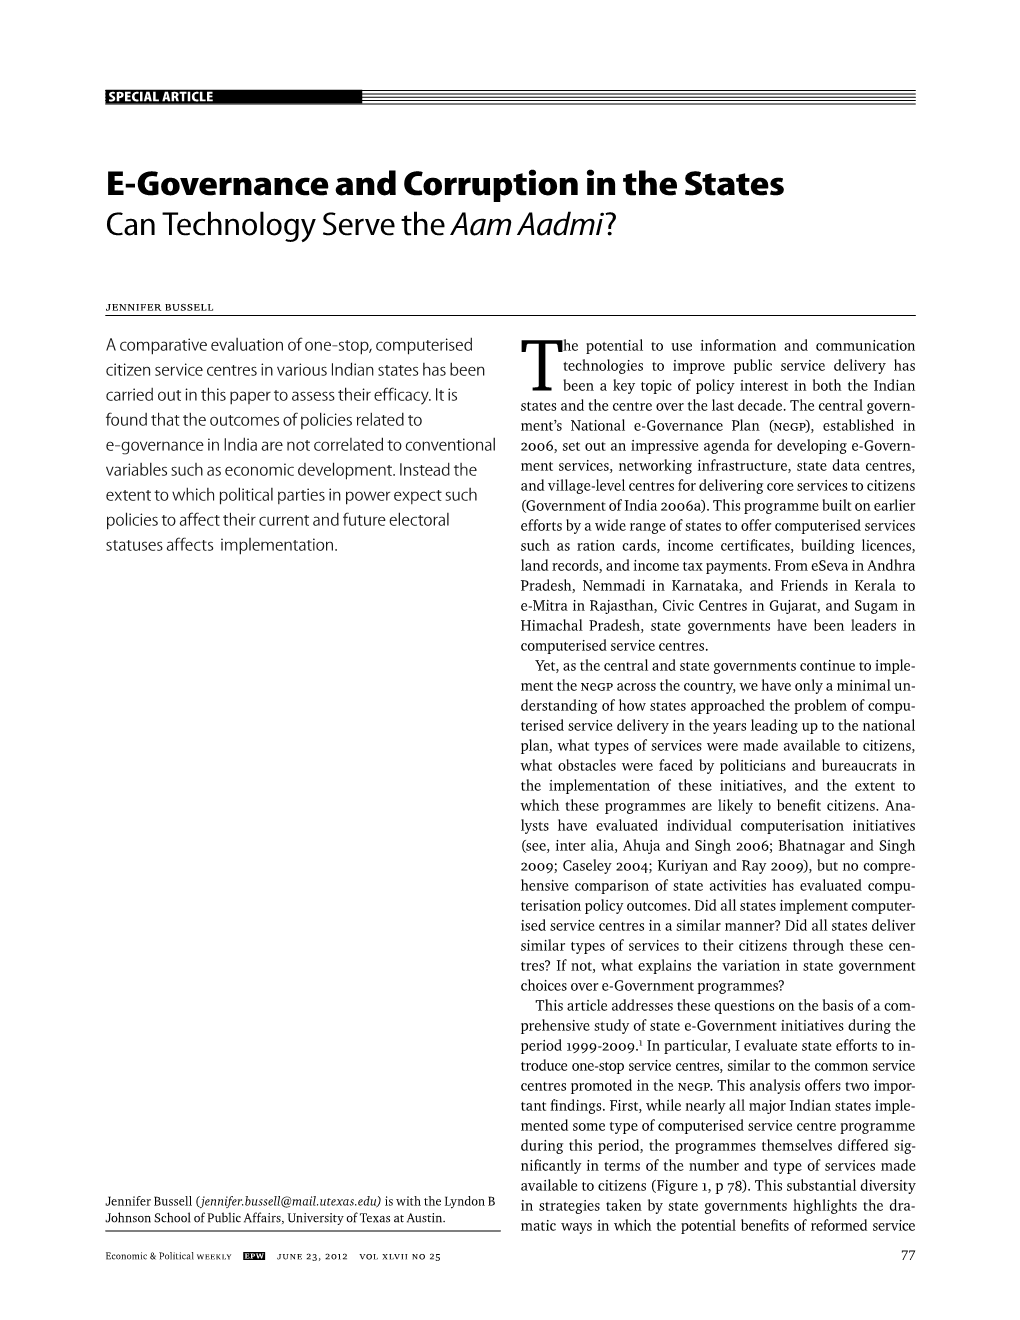 E-Governance and Corruption in the States Can Technology Serve the Aam Aadmi?